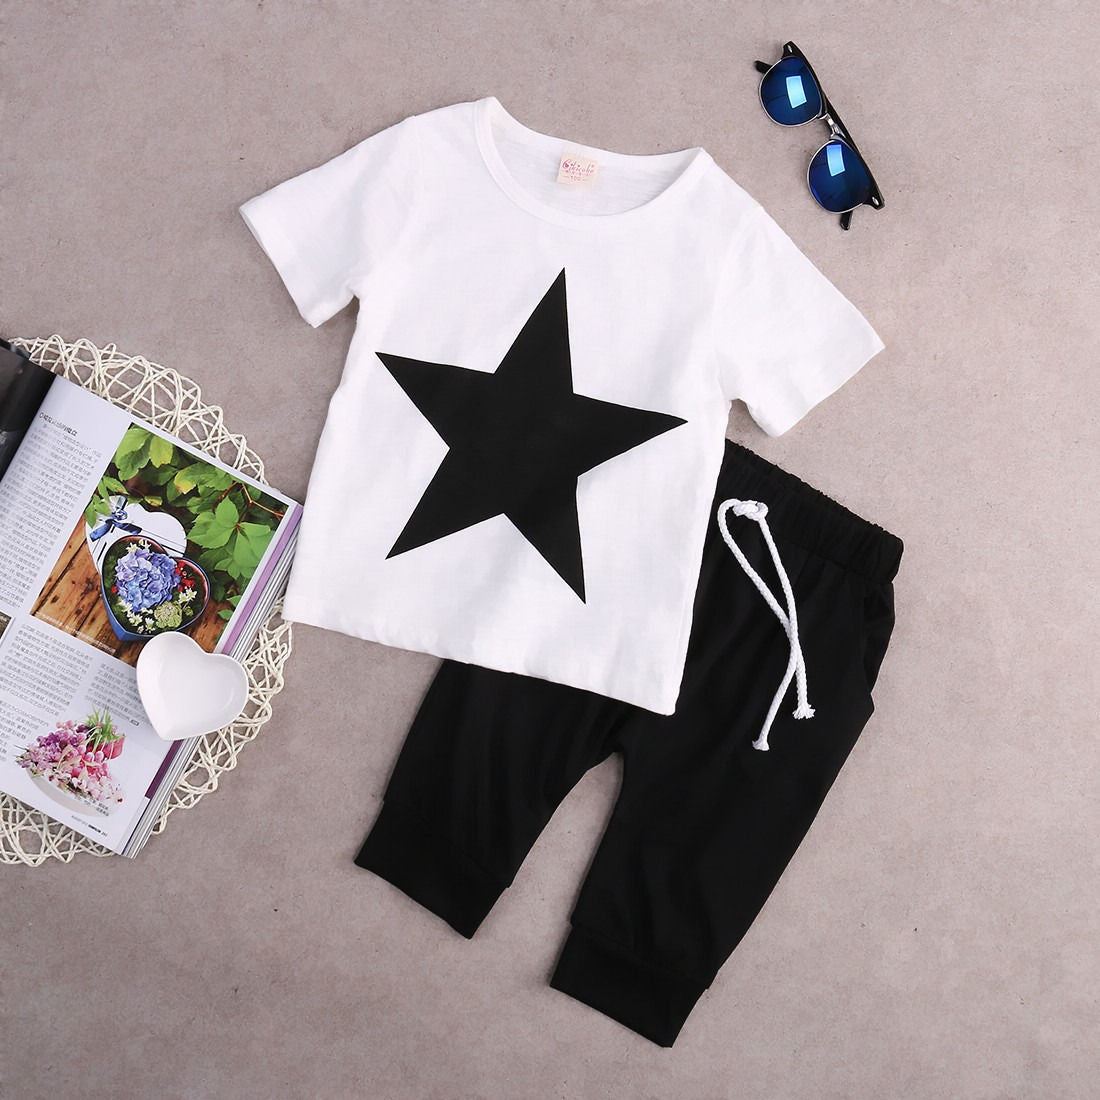 Toddler Kids Baby Boys Clothes Star T-shirt Tops Harem Pants 2pcs Outfits Clothing Set 2-7Y